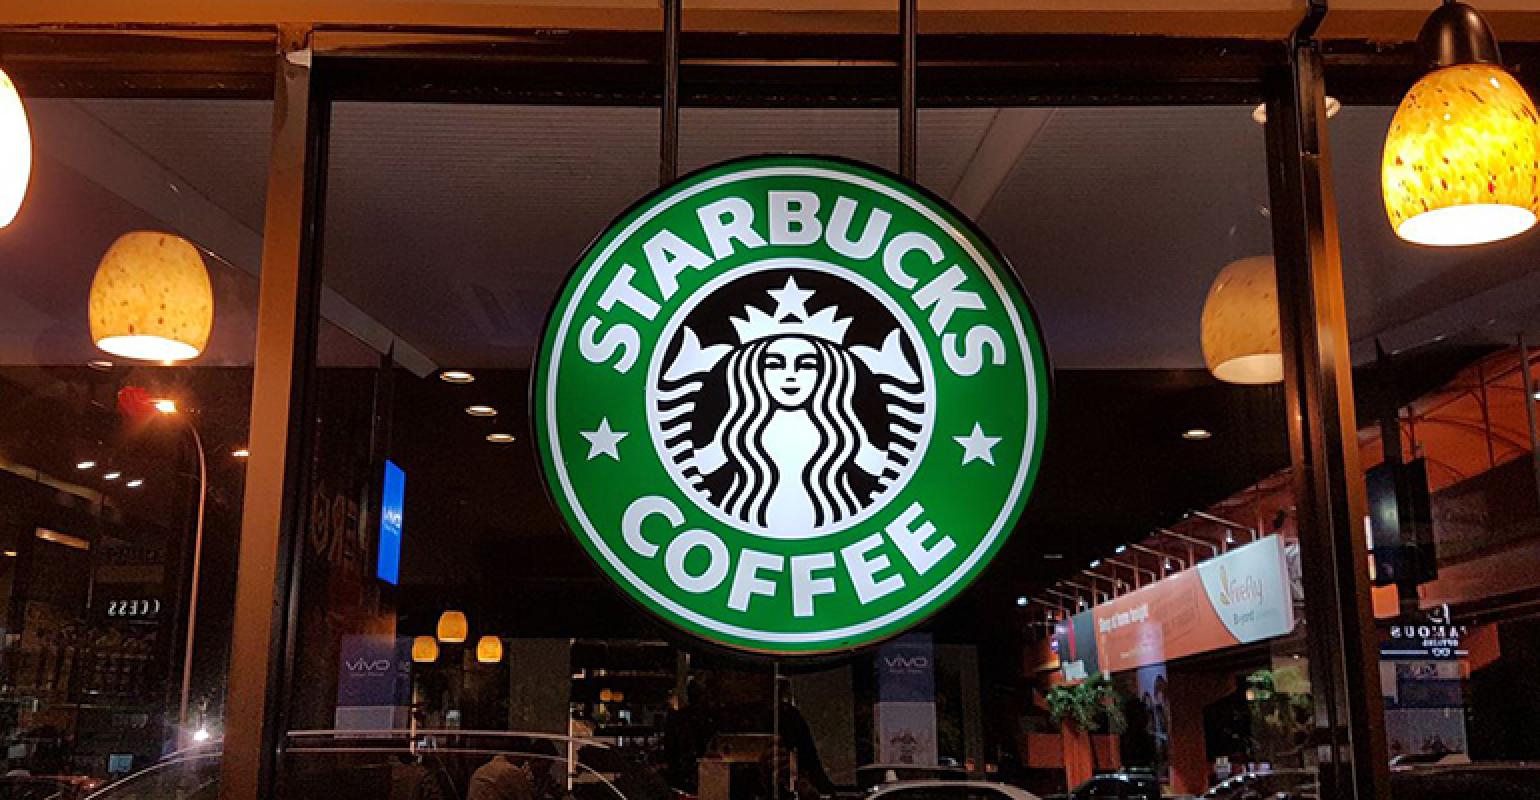 Starbucks announces 3% pay raises and new benefits for baristas